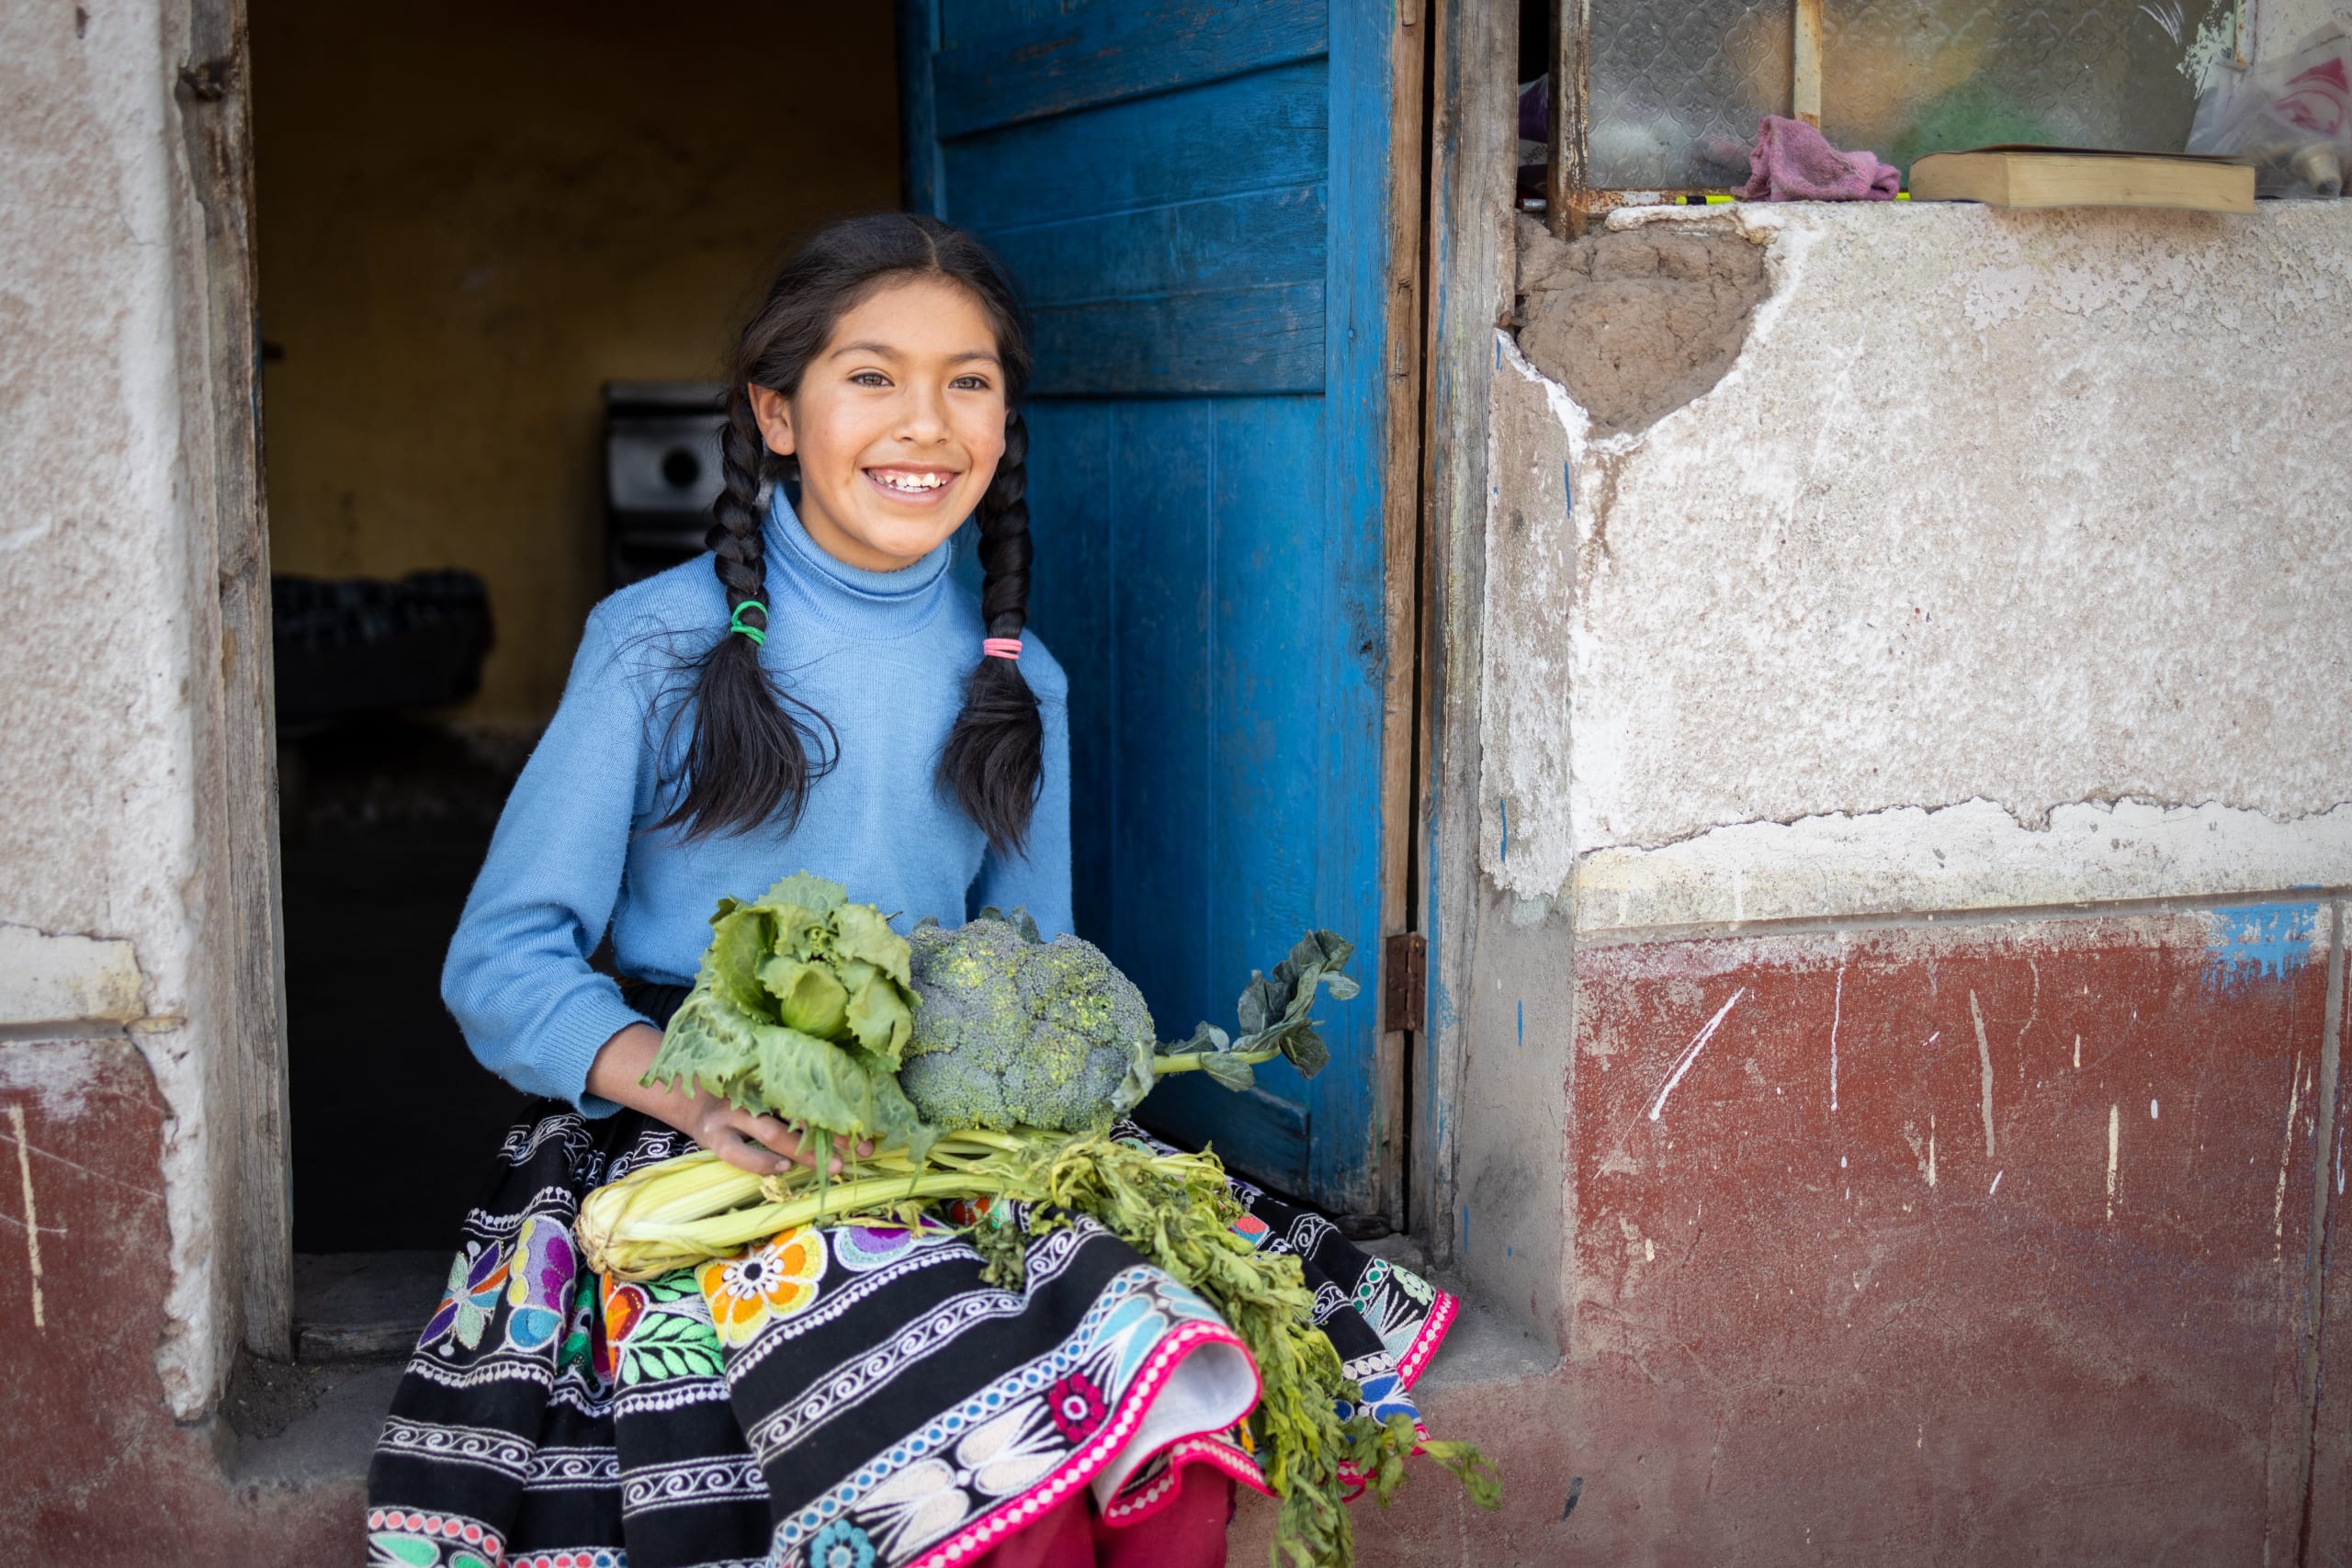 A young girl in a blue top and colourful skirt sits in the doorway of her home, holding the vegetables she has grown on her lap